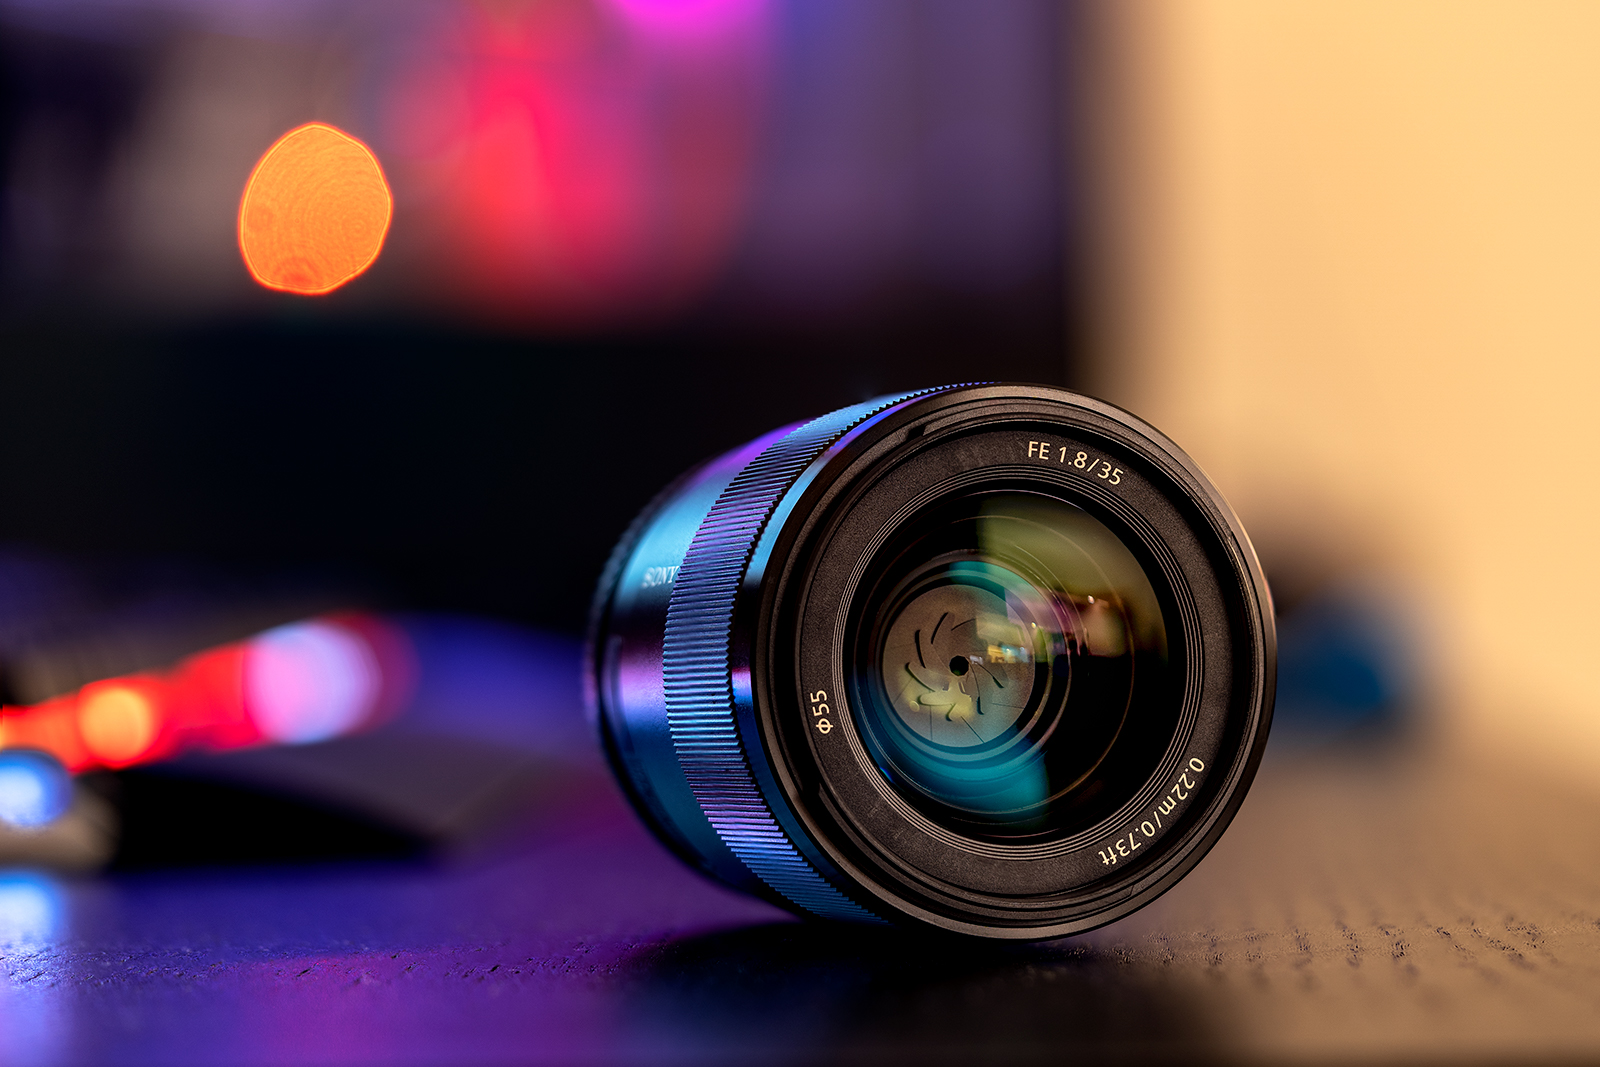 Sony FE 35mm f/1.8 Review - The Photography Enthusiast